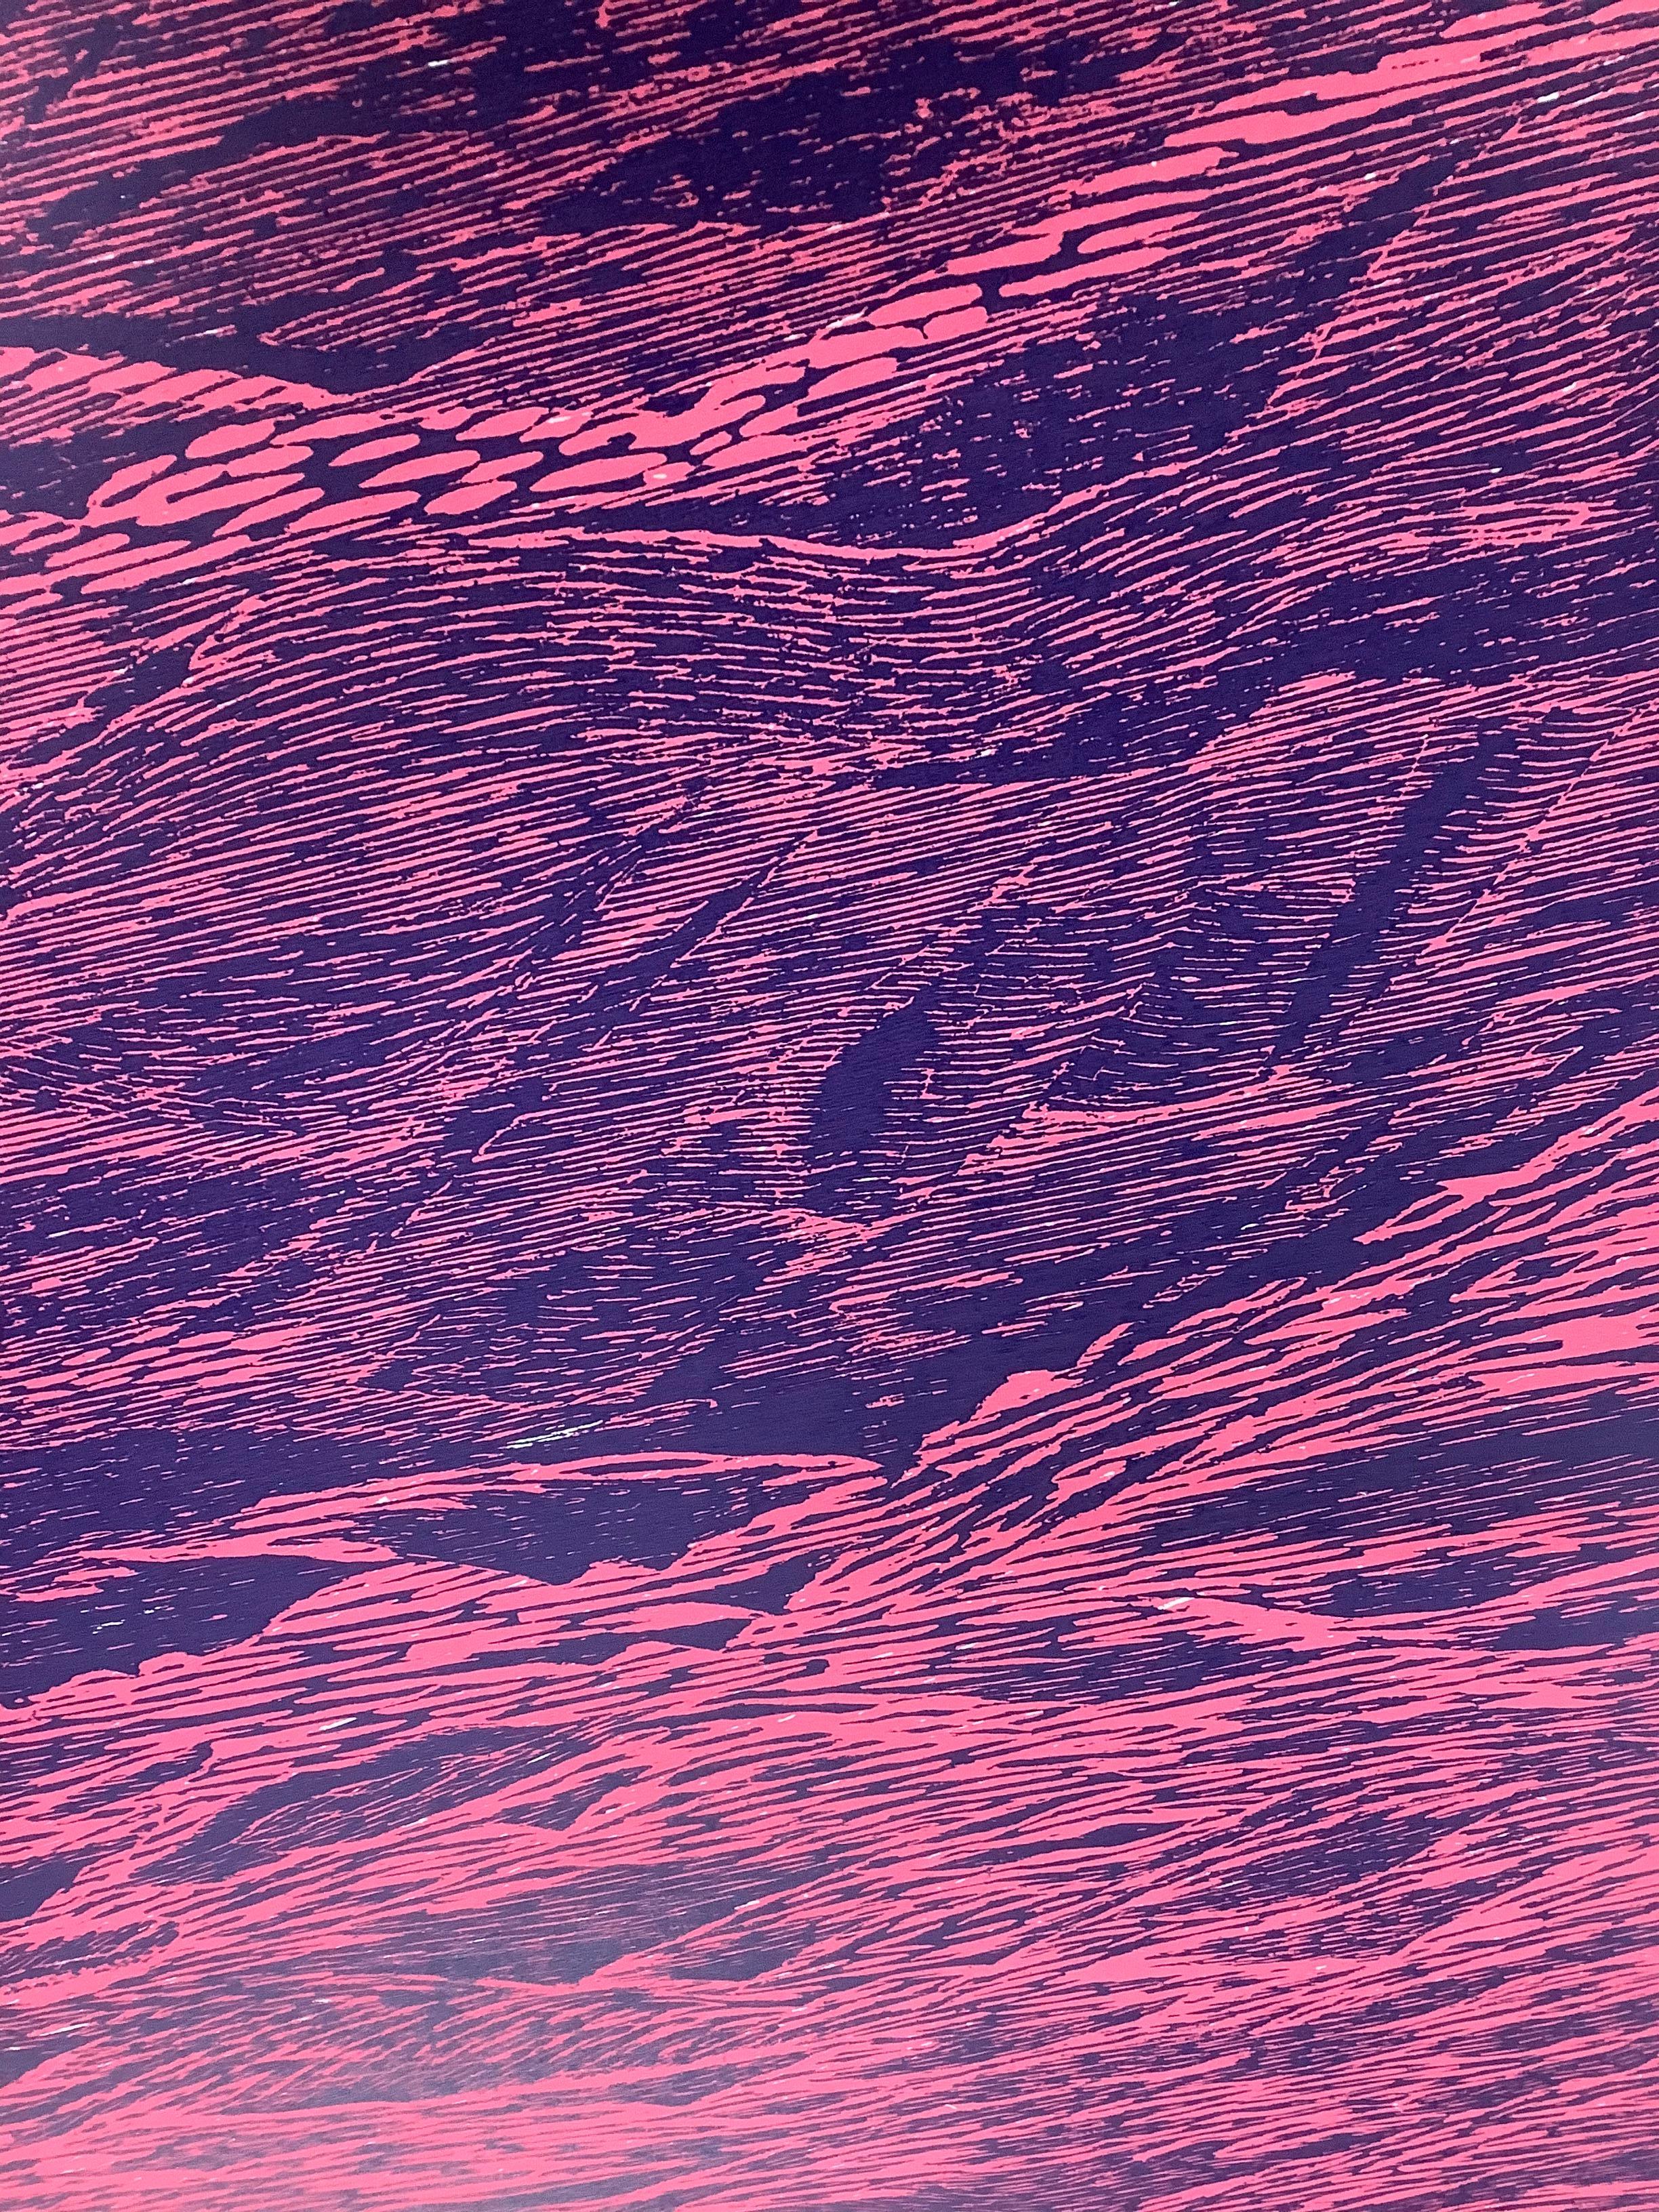 Seascape Variation Five, Ocean Waves Woodcut Print in Pale Pink and Dark Blue - Brown Landscape Print by Eve Stockton